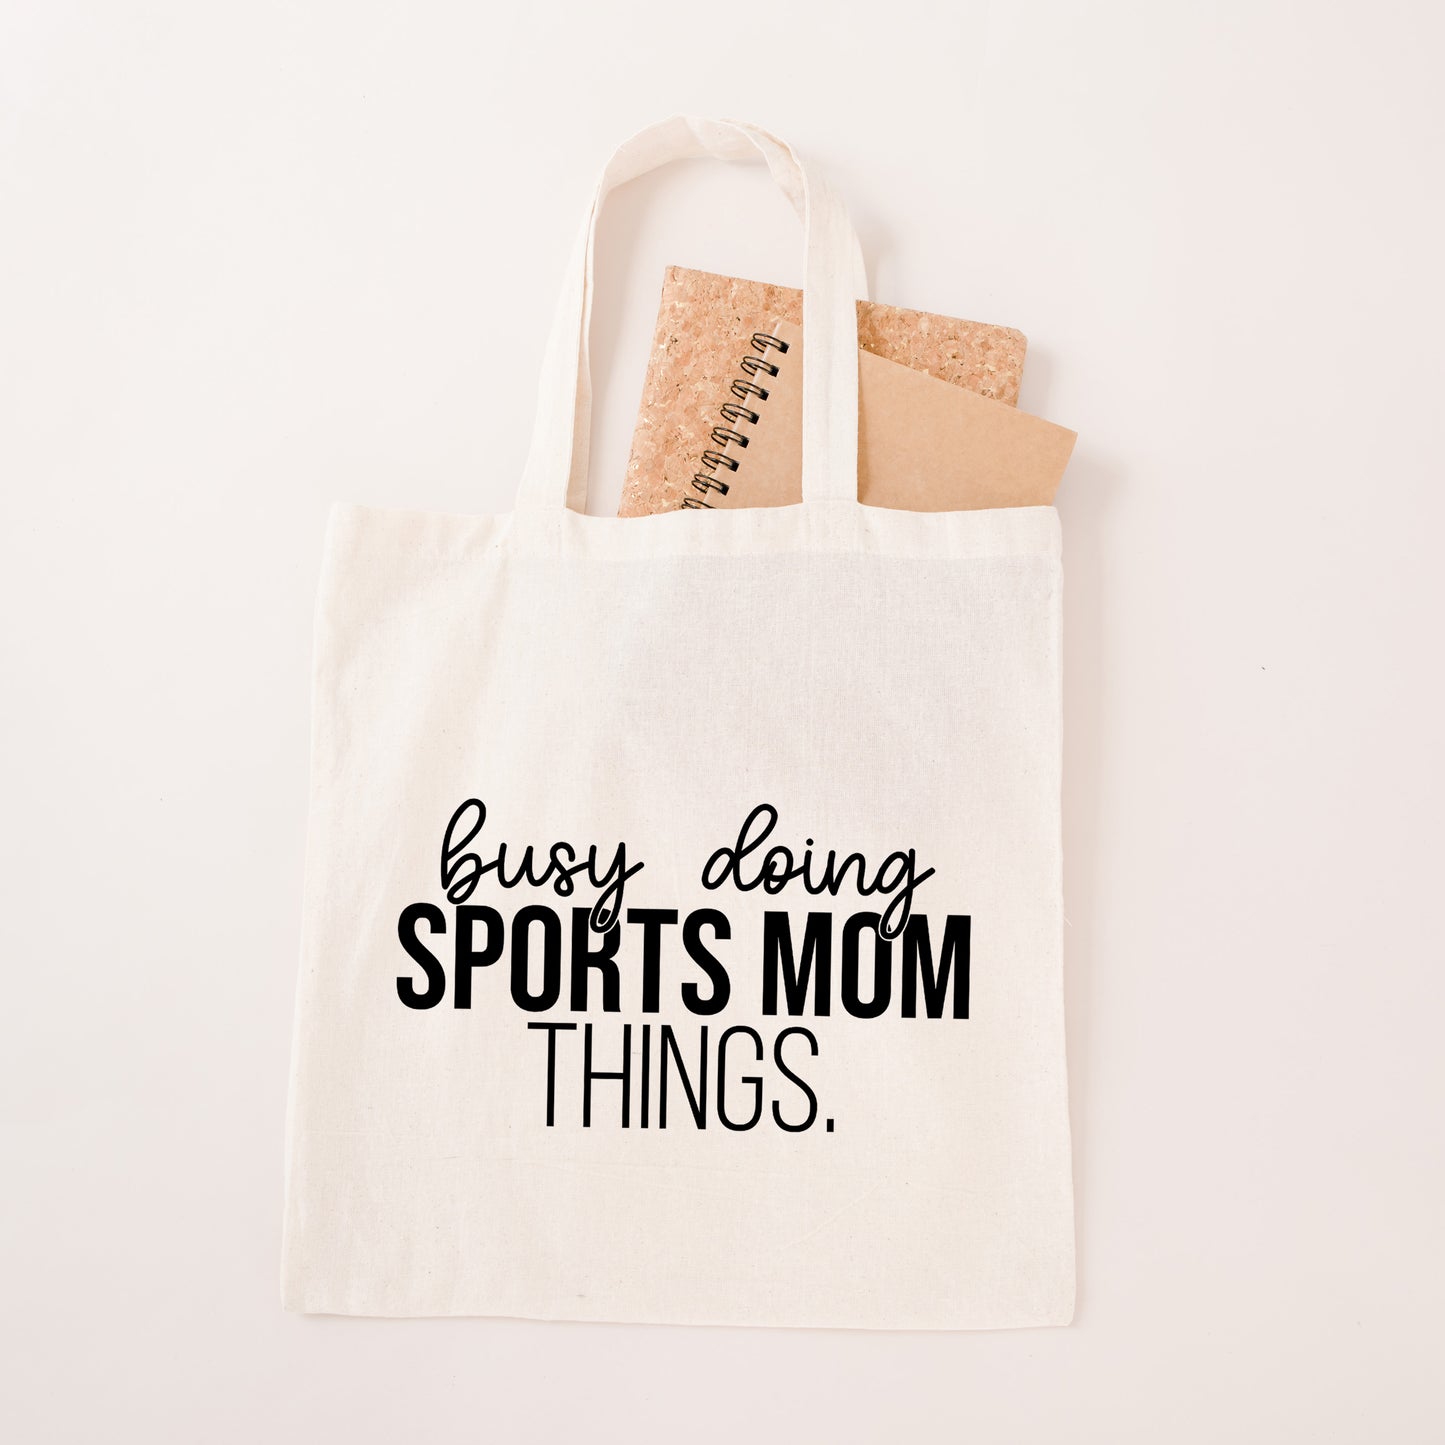 Busy Doing Sports Mom Things | Tote Bag